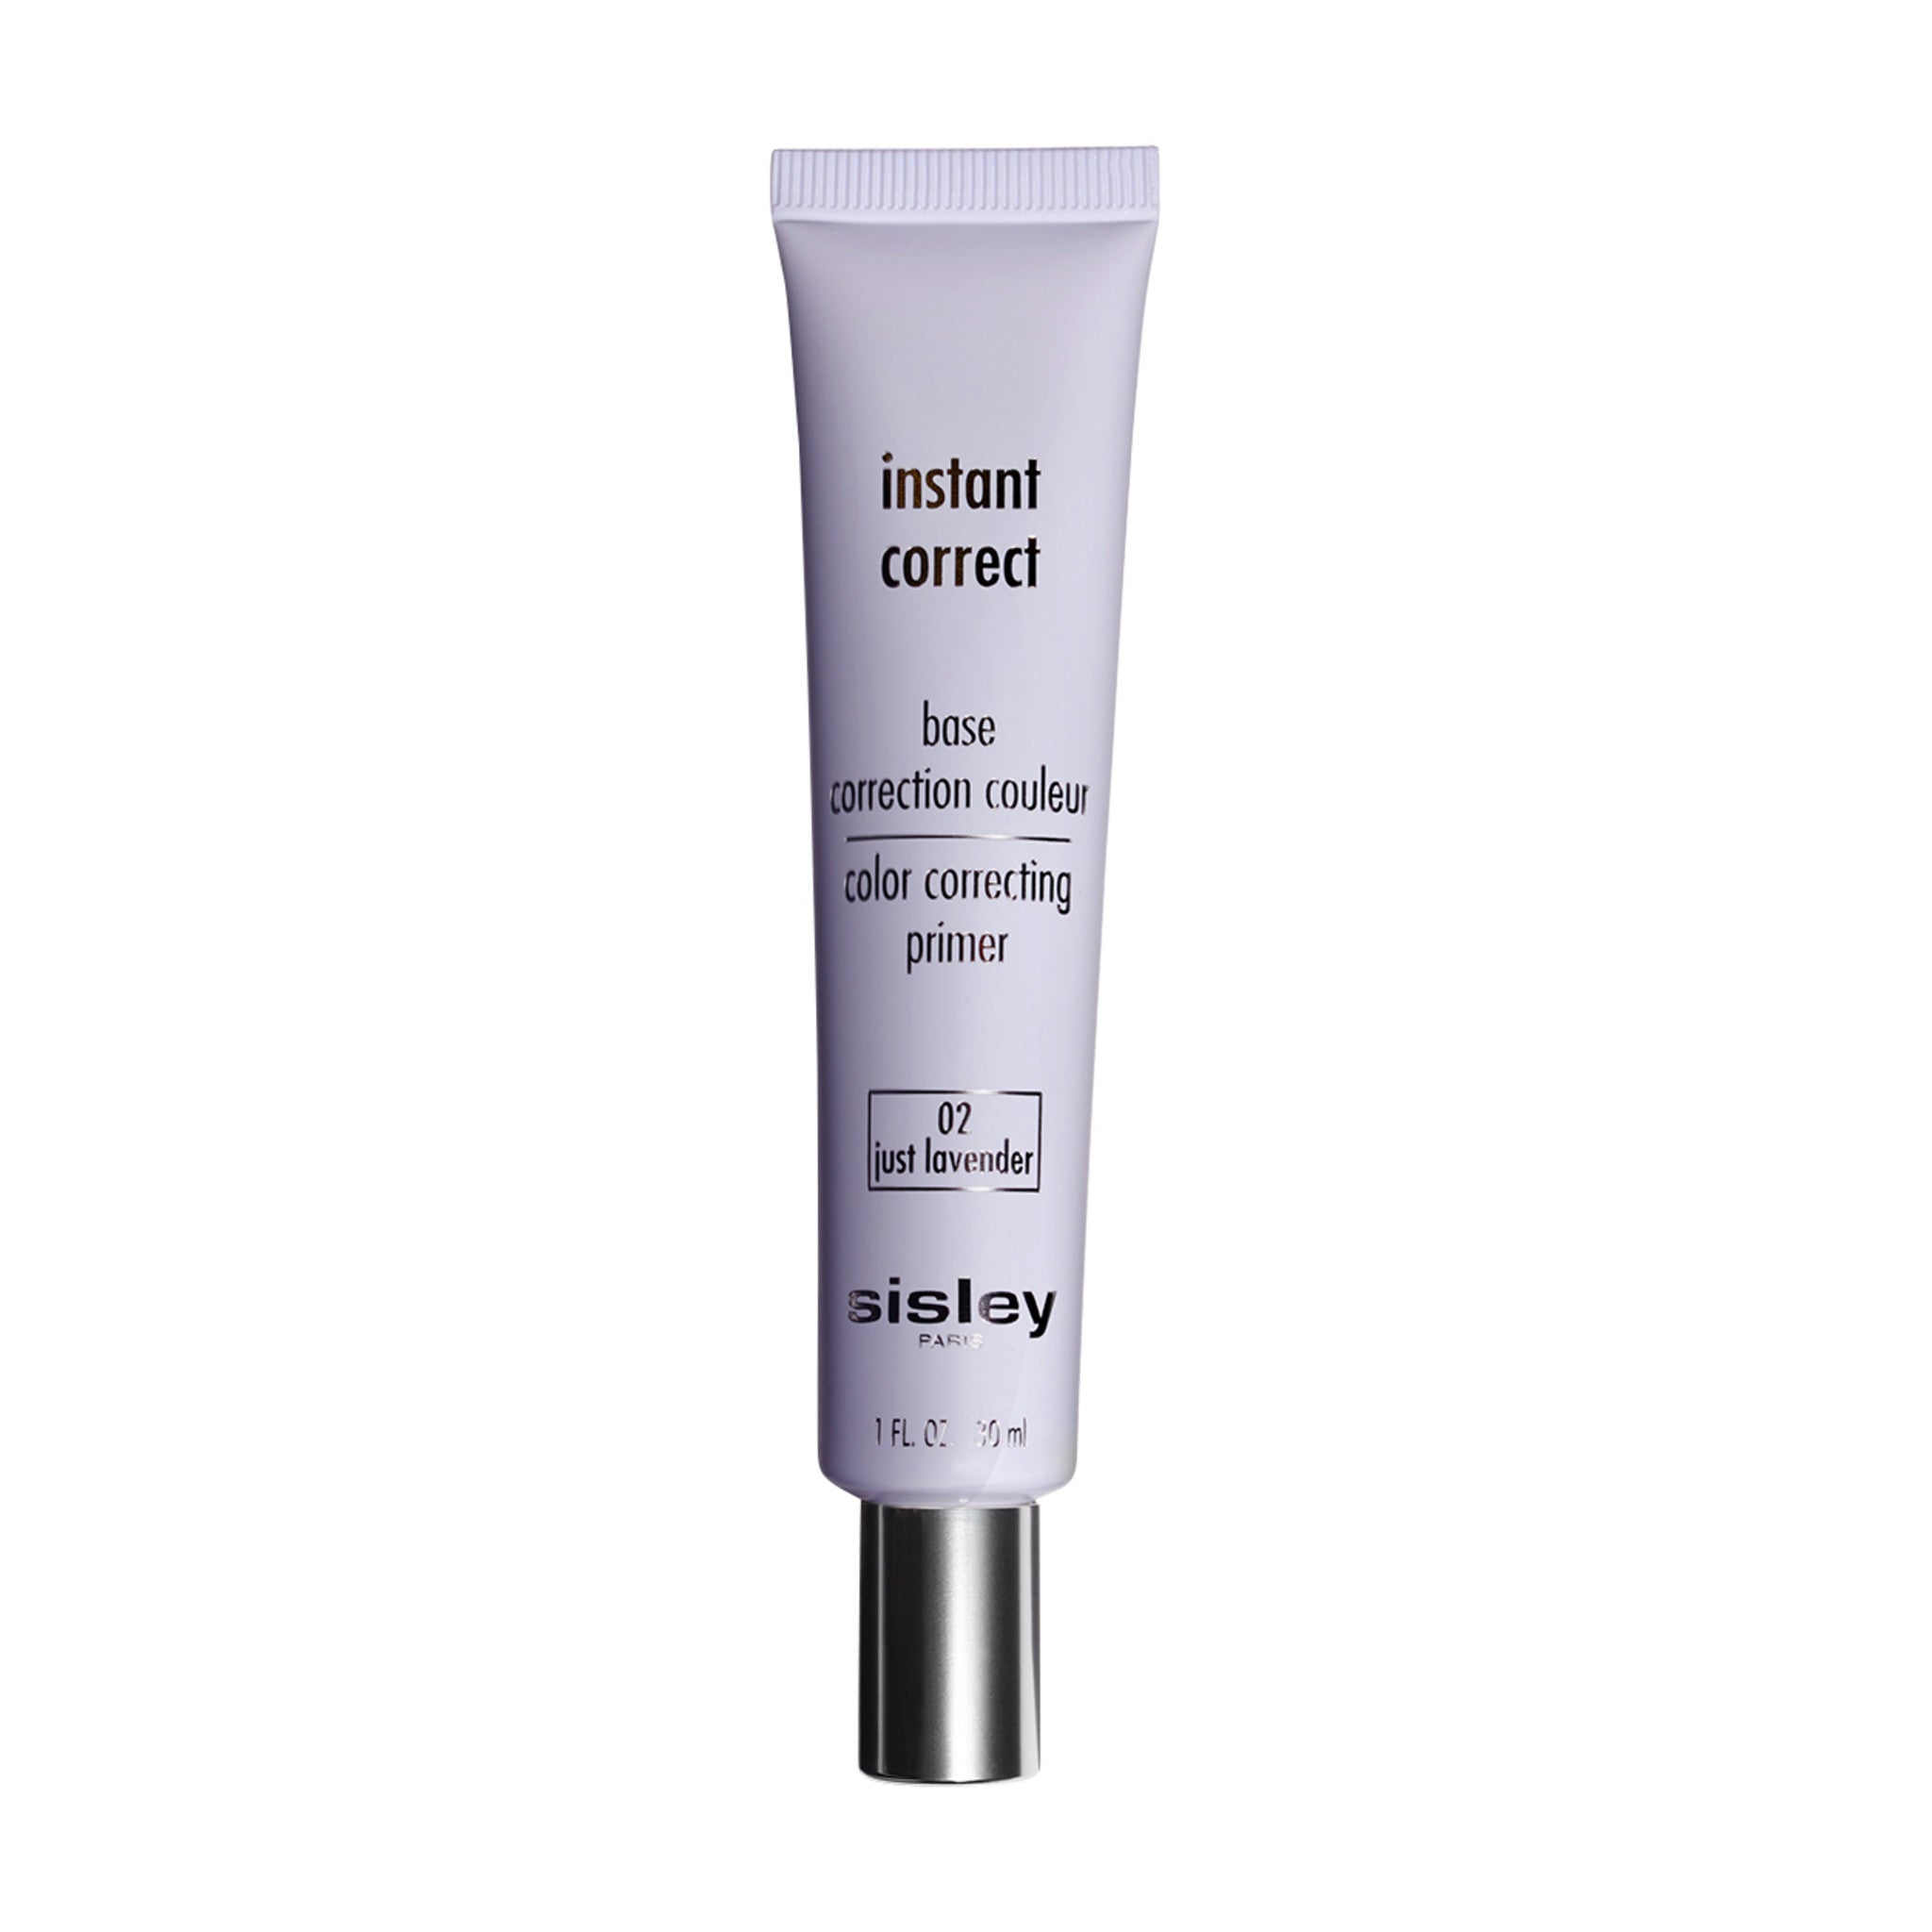 Sisley-Paris Instant Correct Color Correcting Primer Color/Shade variant: 2 Just Lavender main image. This product is in the color yellow